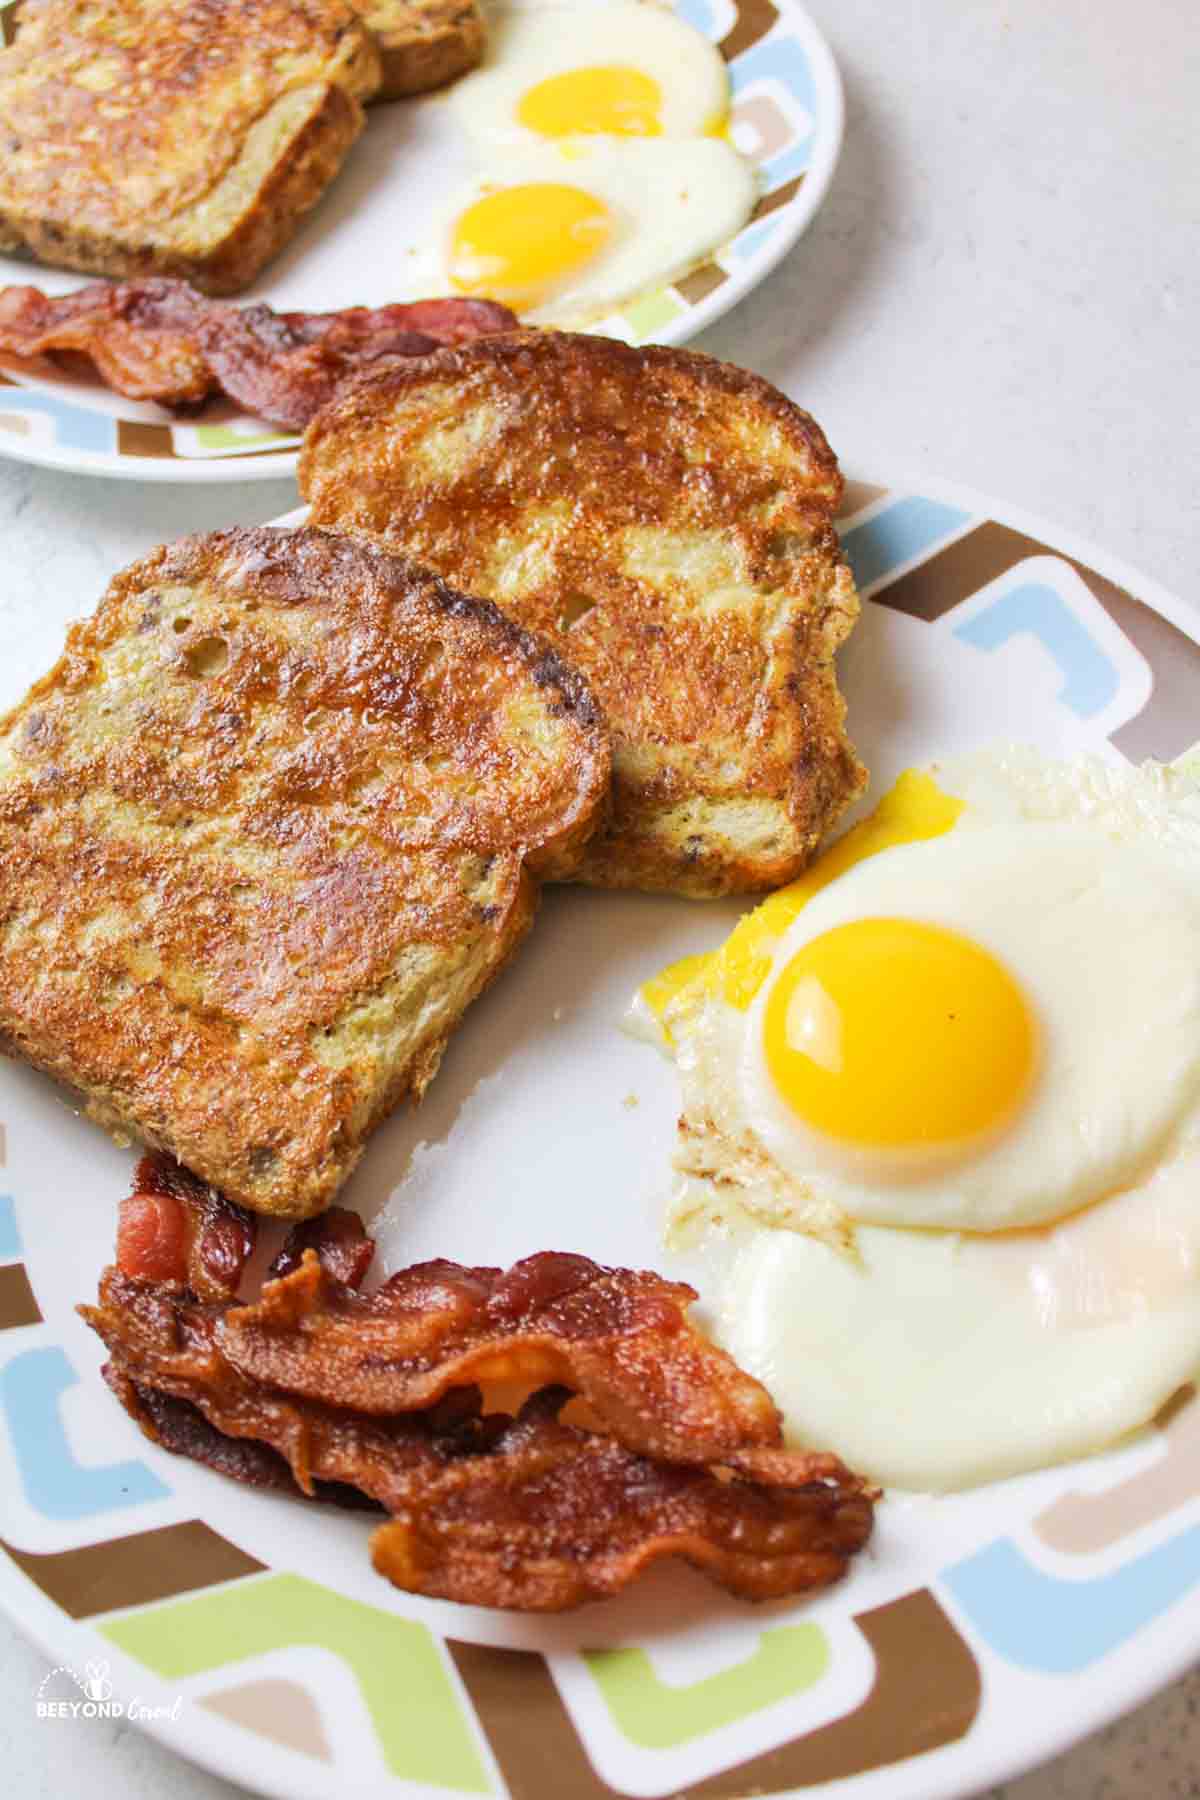 eggs, bacon, and french toast on plates